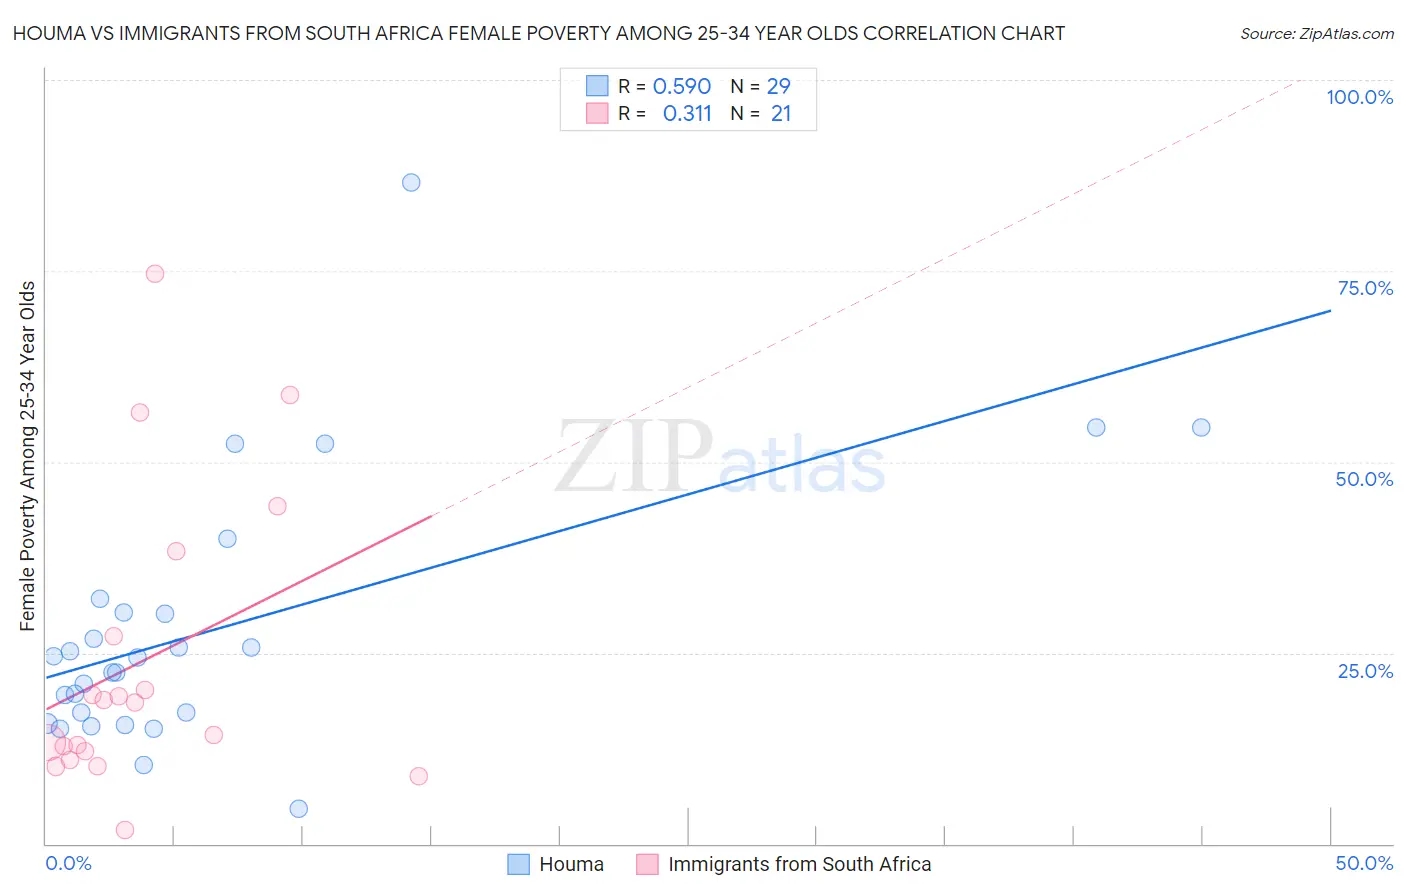 Houma vs Immigrants from South Africa Female Poverty Among 25-34 Year Olds